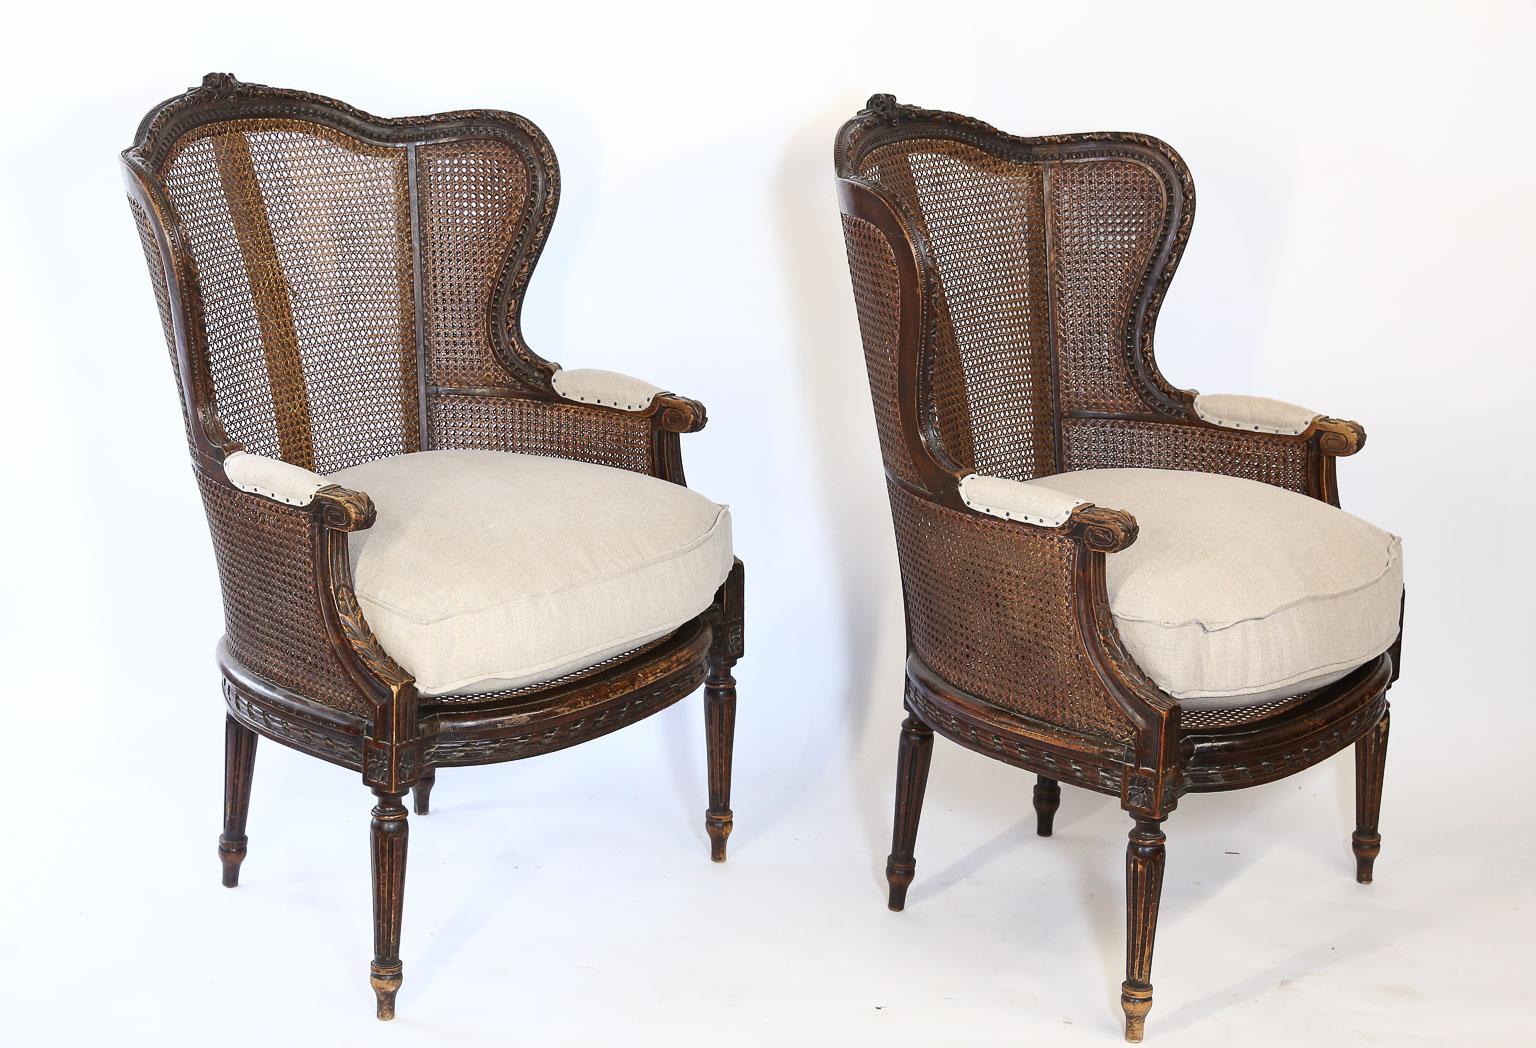 This pair of 19th century cane backed bergère chairs are hand carved and caned. Featuring a newly upholstered Belgian linen seat cushion. This style never goes out of fashion and they are the most comfortable thing to sit in.